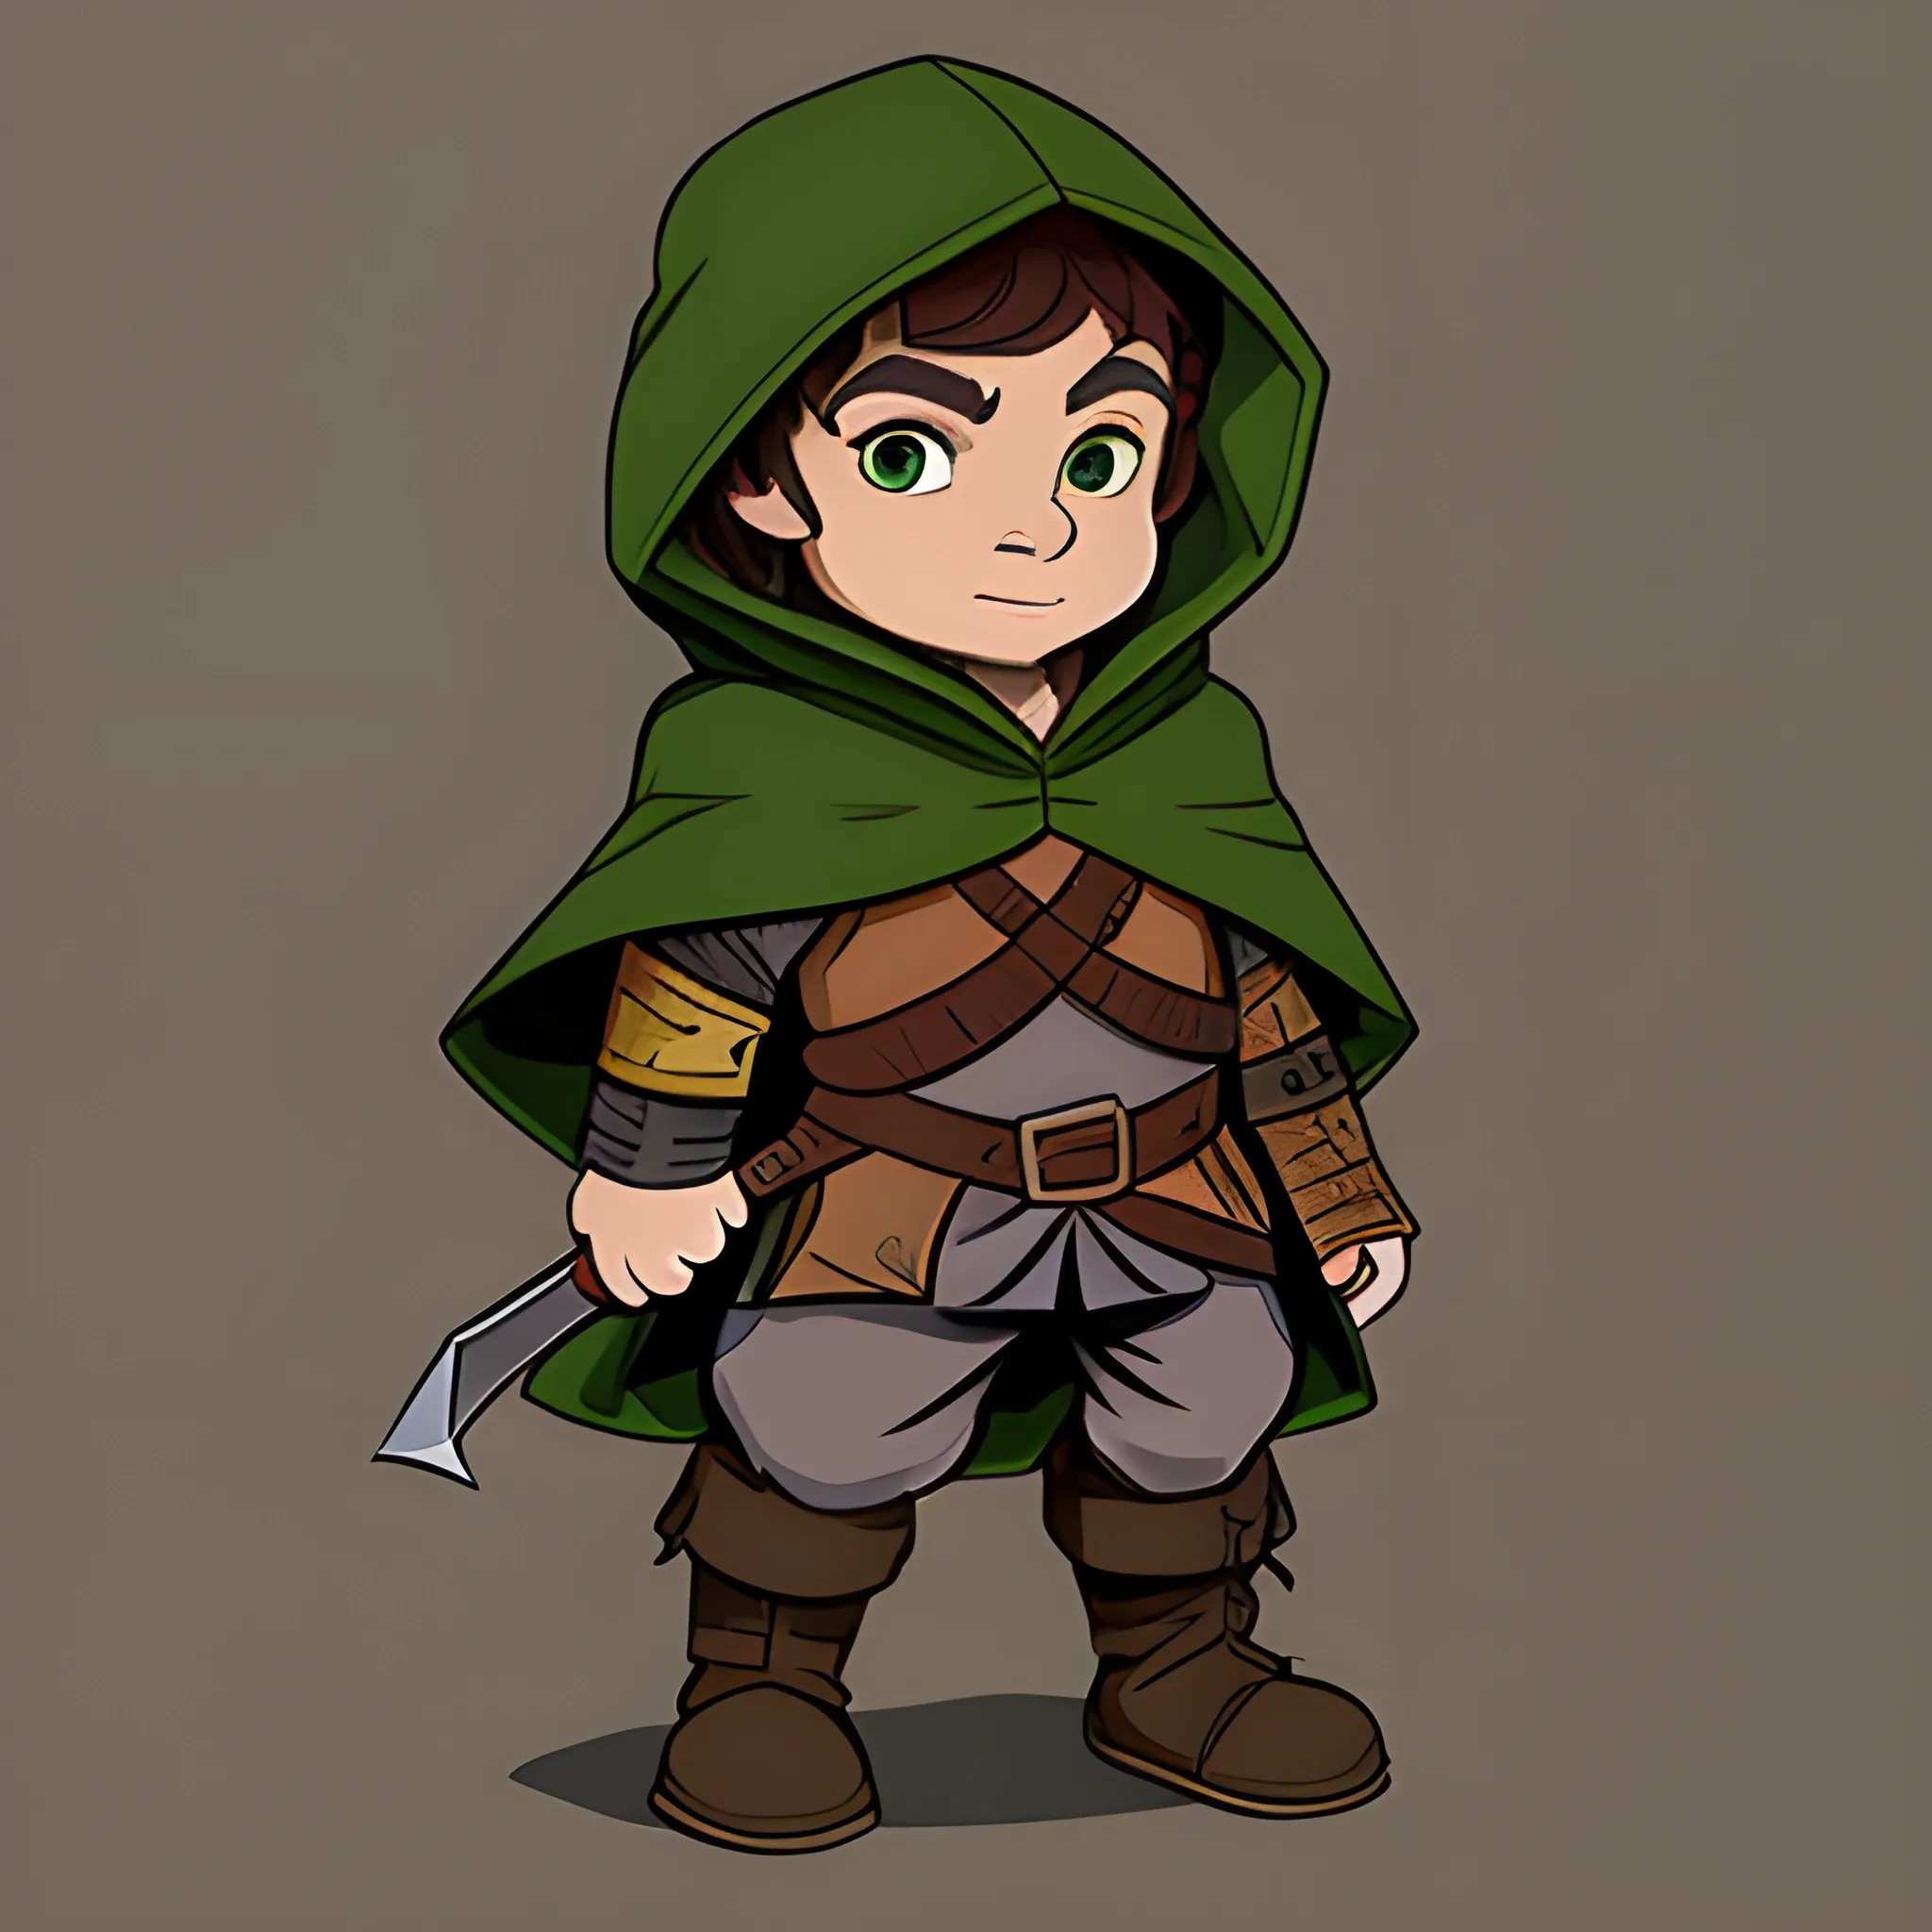 dungeons and dragons, halfling, rogue, green eyes, brown hair, tan skin, hooded cloak, short, black outfit, green trim, Cartoon, sword, parchment